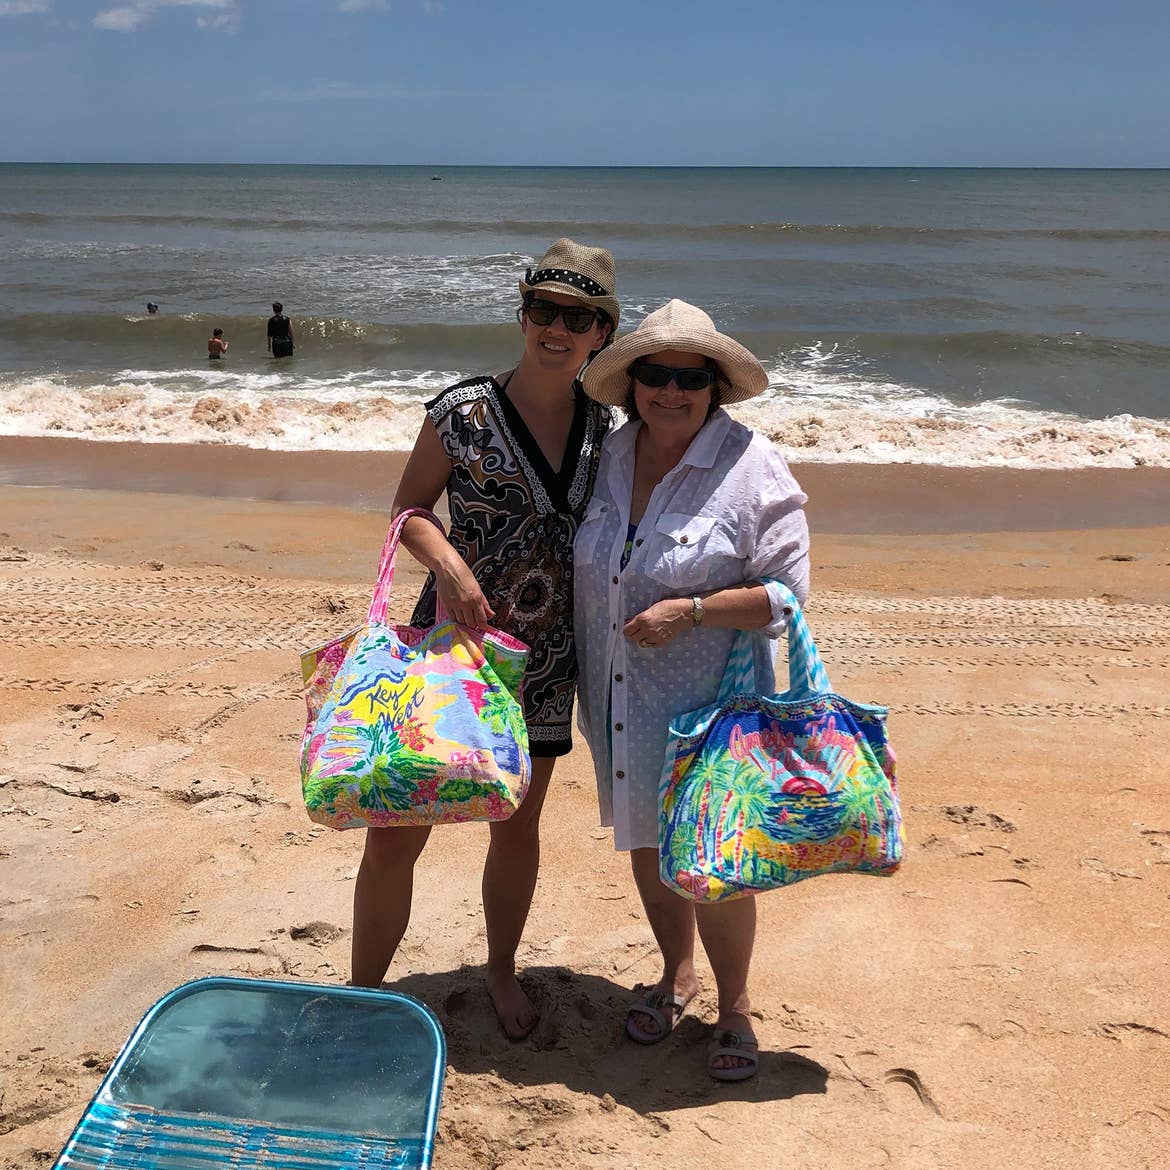 Featured Contributor, Jenn C. Harmon (left) and her mom (right) pose on the sands of Flagler Beach in Florida while holding their matching Vera Bradley beach bags.